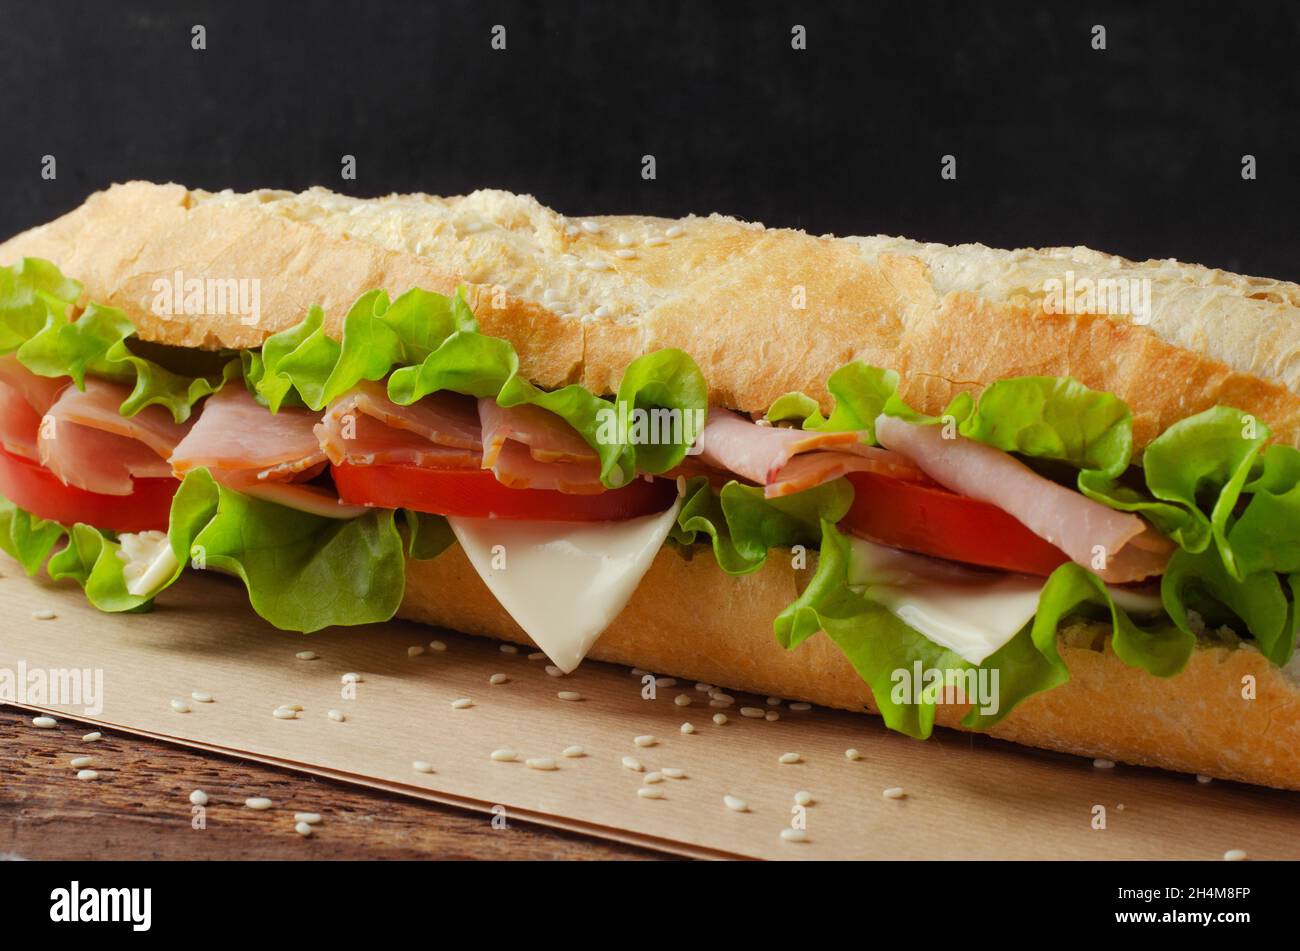 Sandwich with ham, tomato and cheese on a wooden background. Close-up Stock Photo